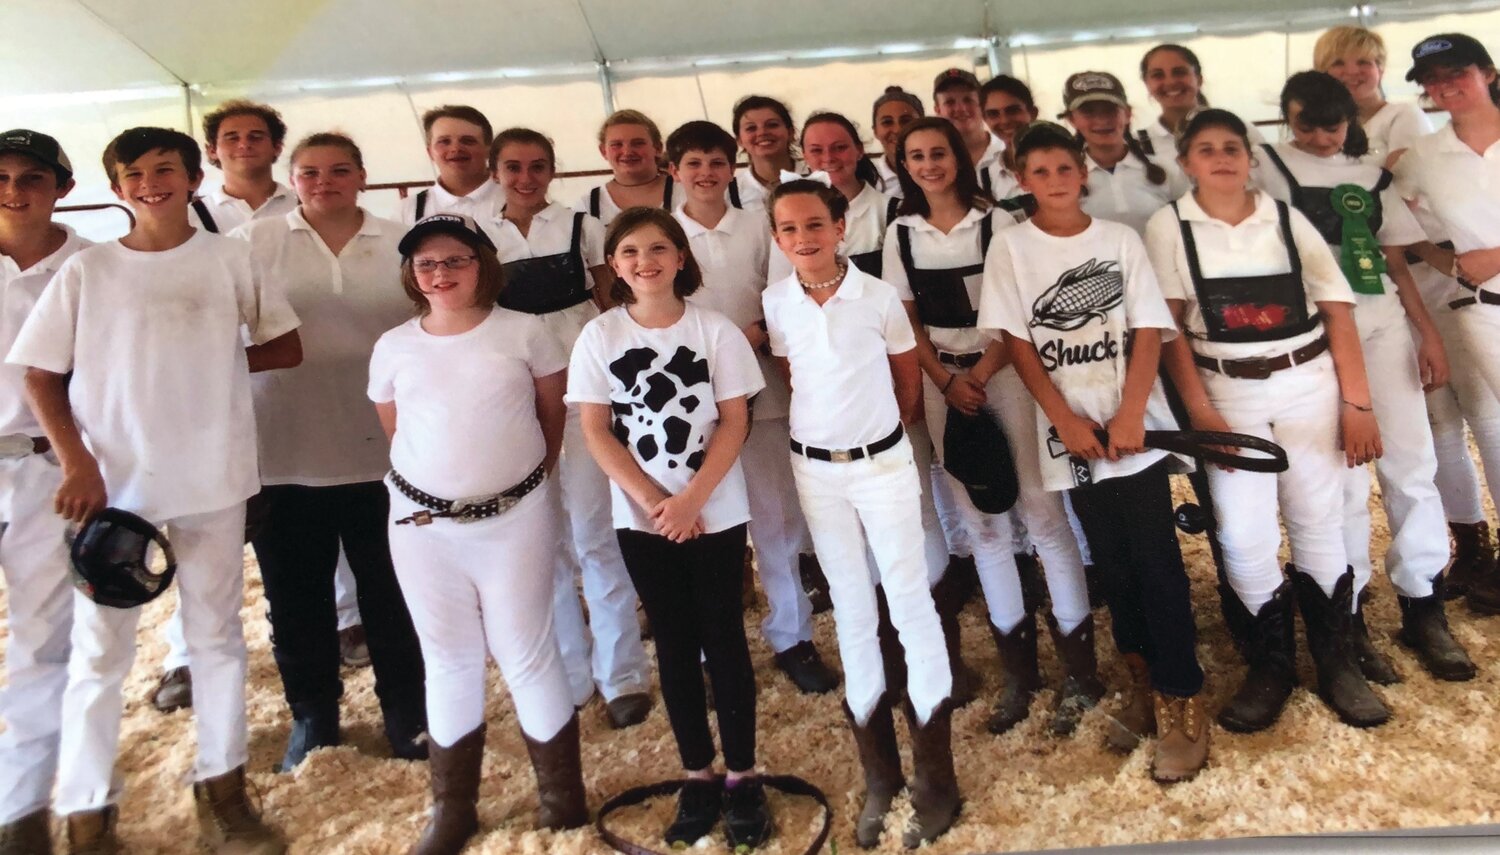 Past and present members of the Mount Airy 4-H Dairy Cub will celebrate its 100th year at the Hunterdon County 4-H and Agriculture Fair.